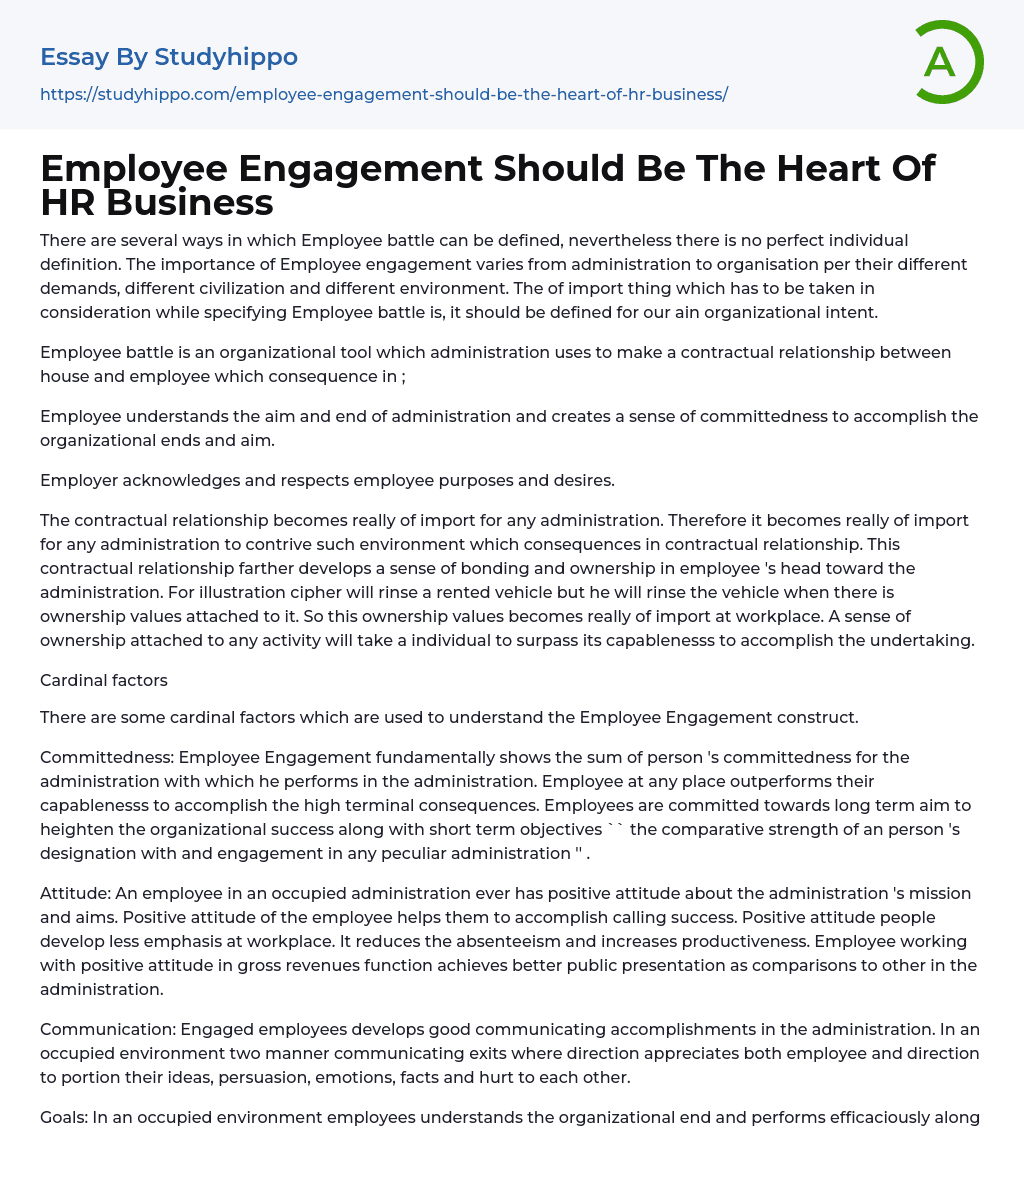 Employee Engagement Should Be The Heart Of HR Business Essay Example